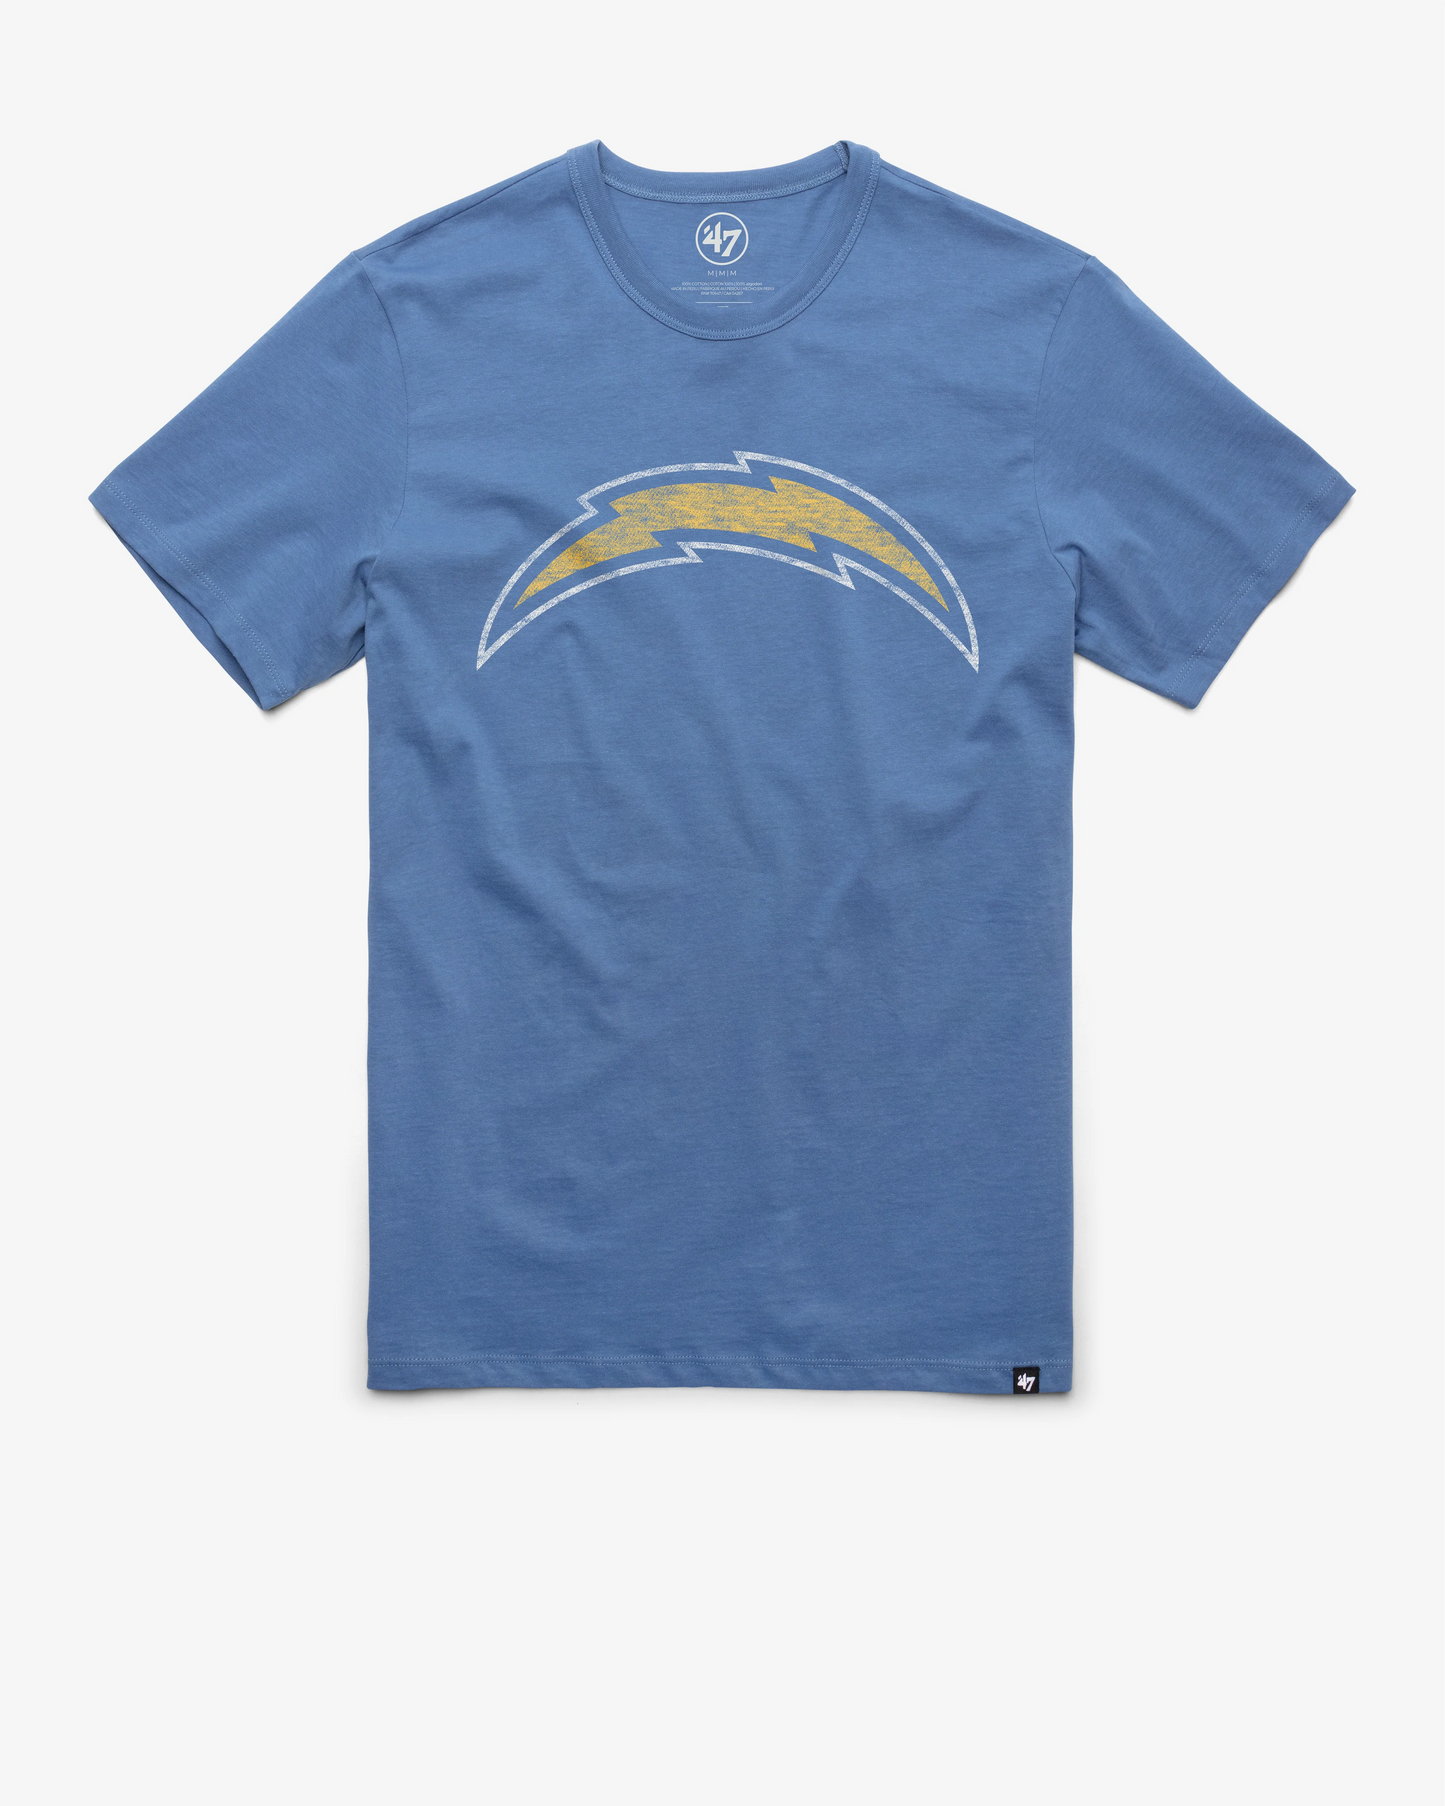 LOS ANGELES CHARGERS MEN'S FRANKLIN T-SHIRT